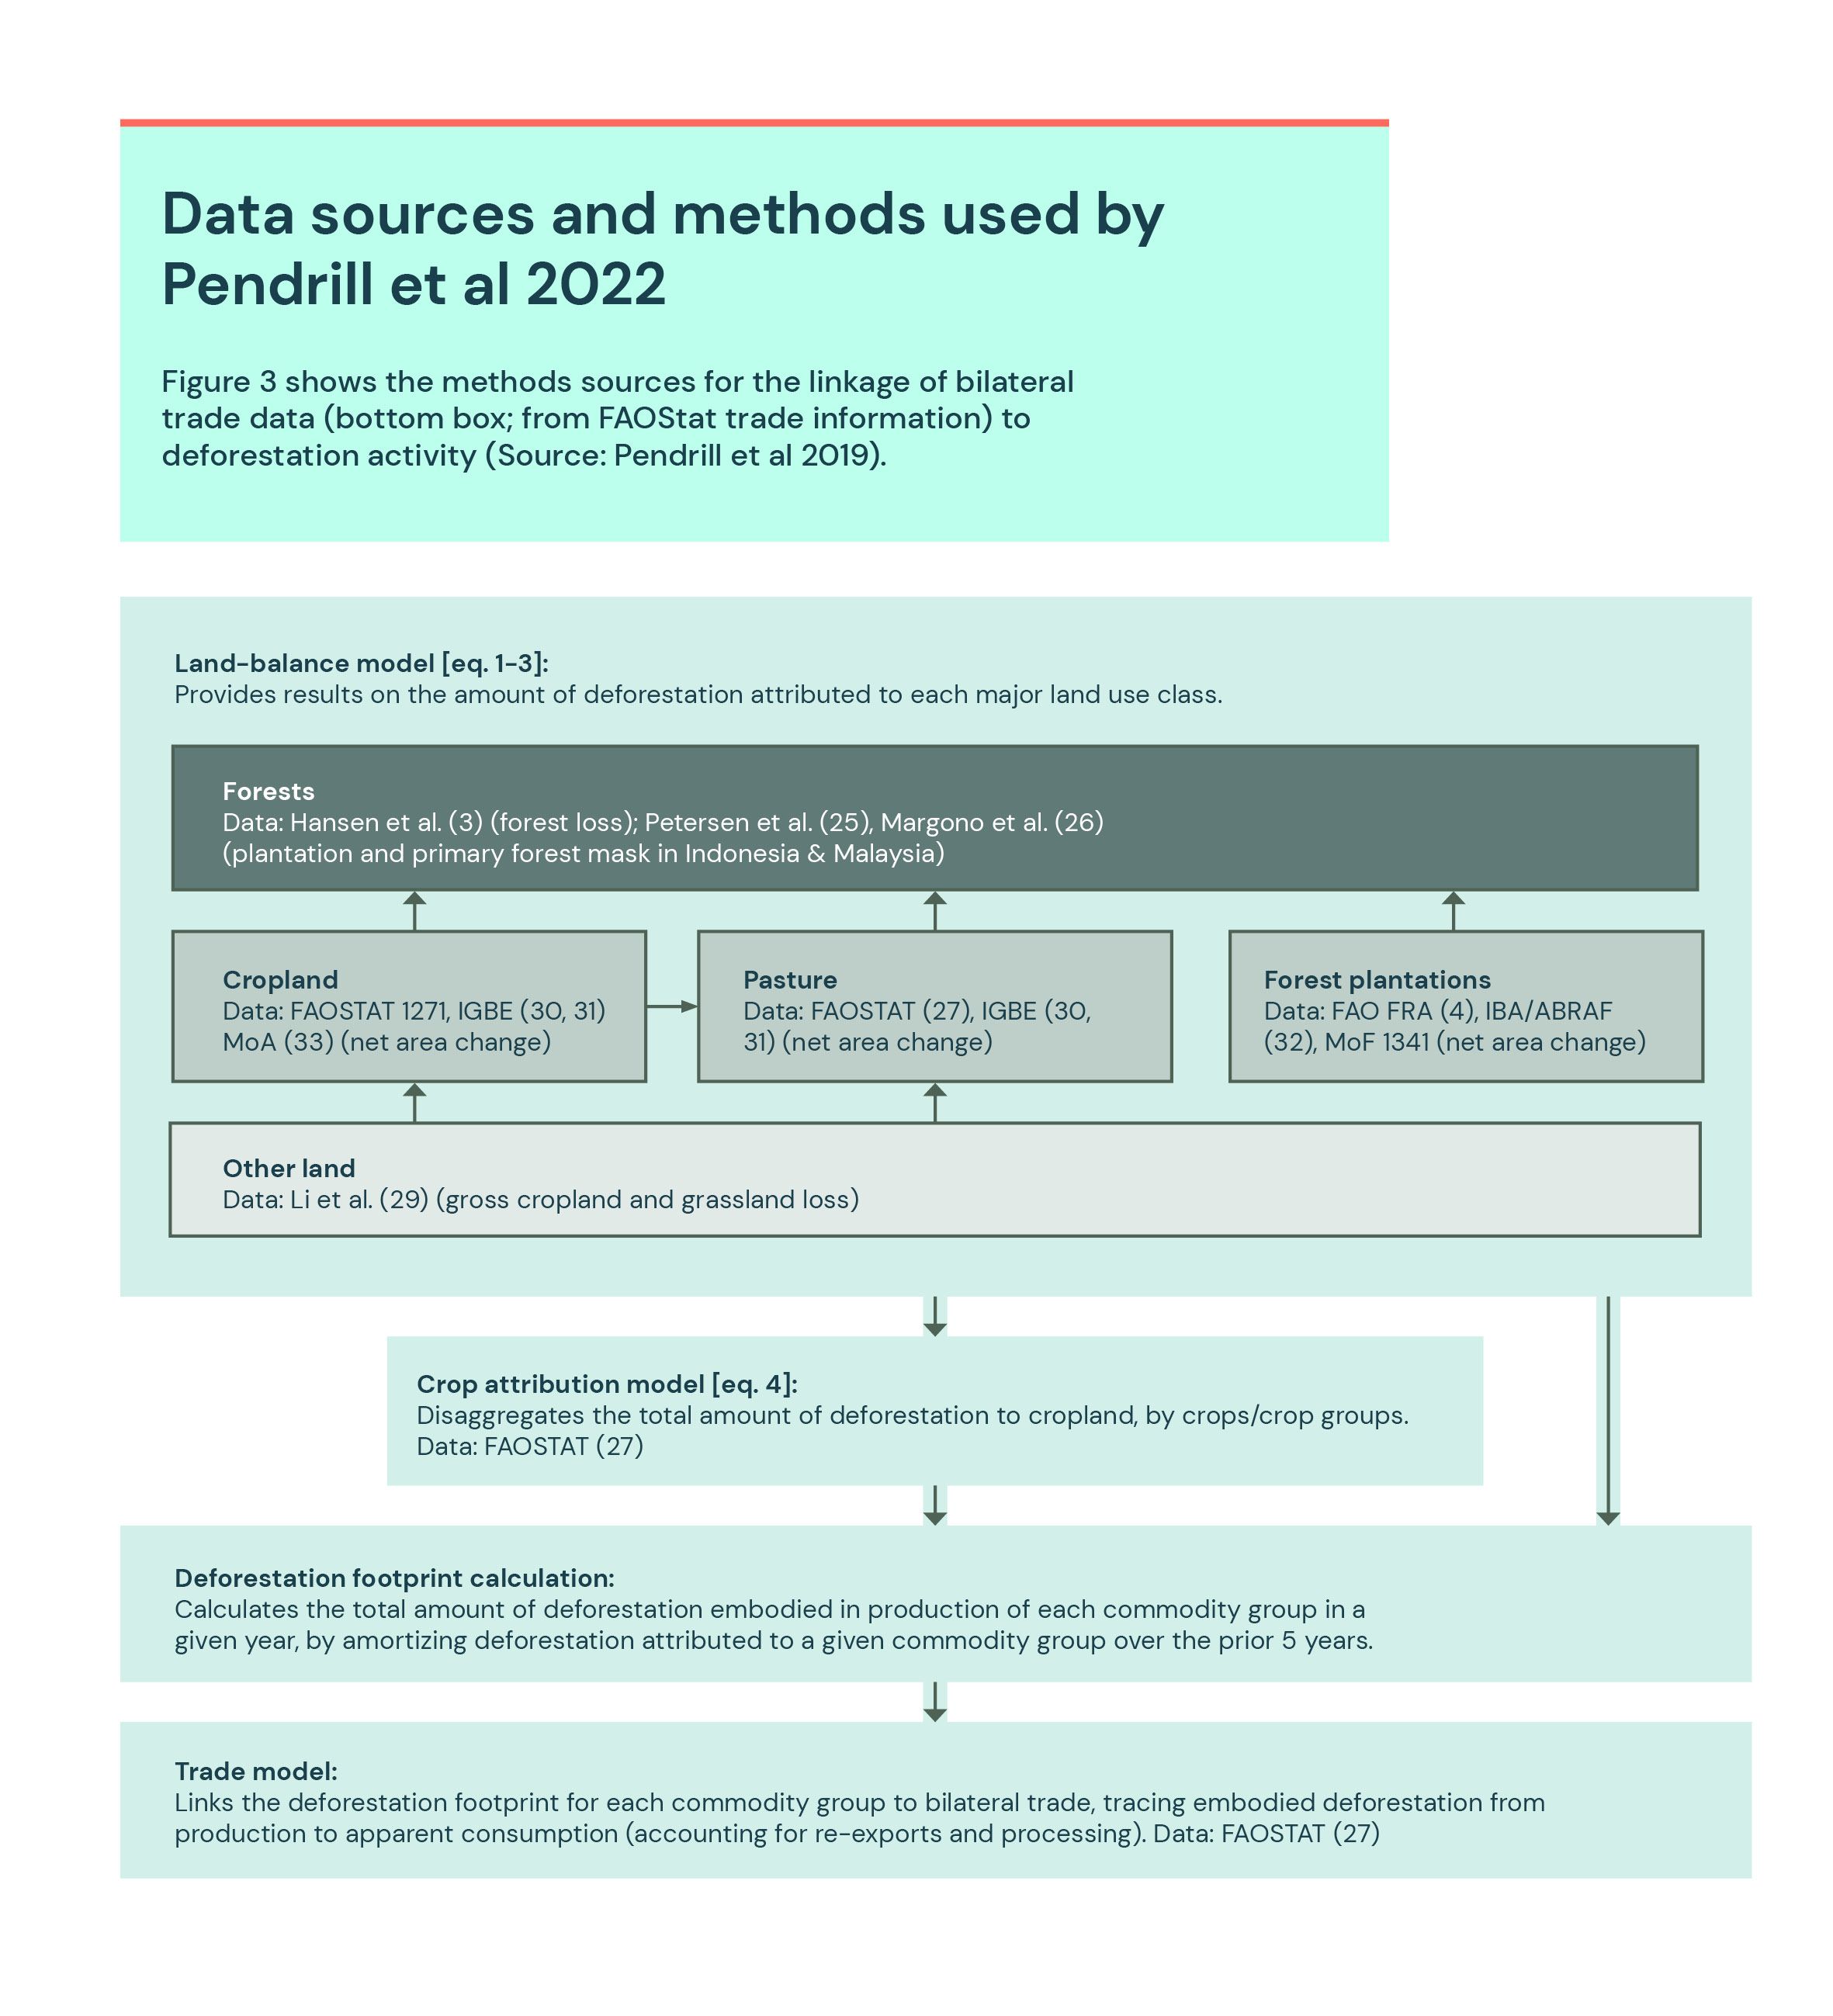 Data sources and methods used by Pendrill et al 2022